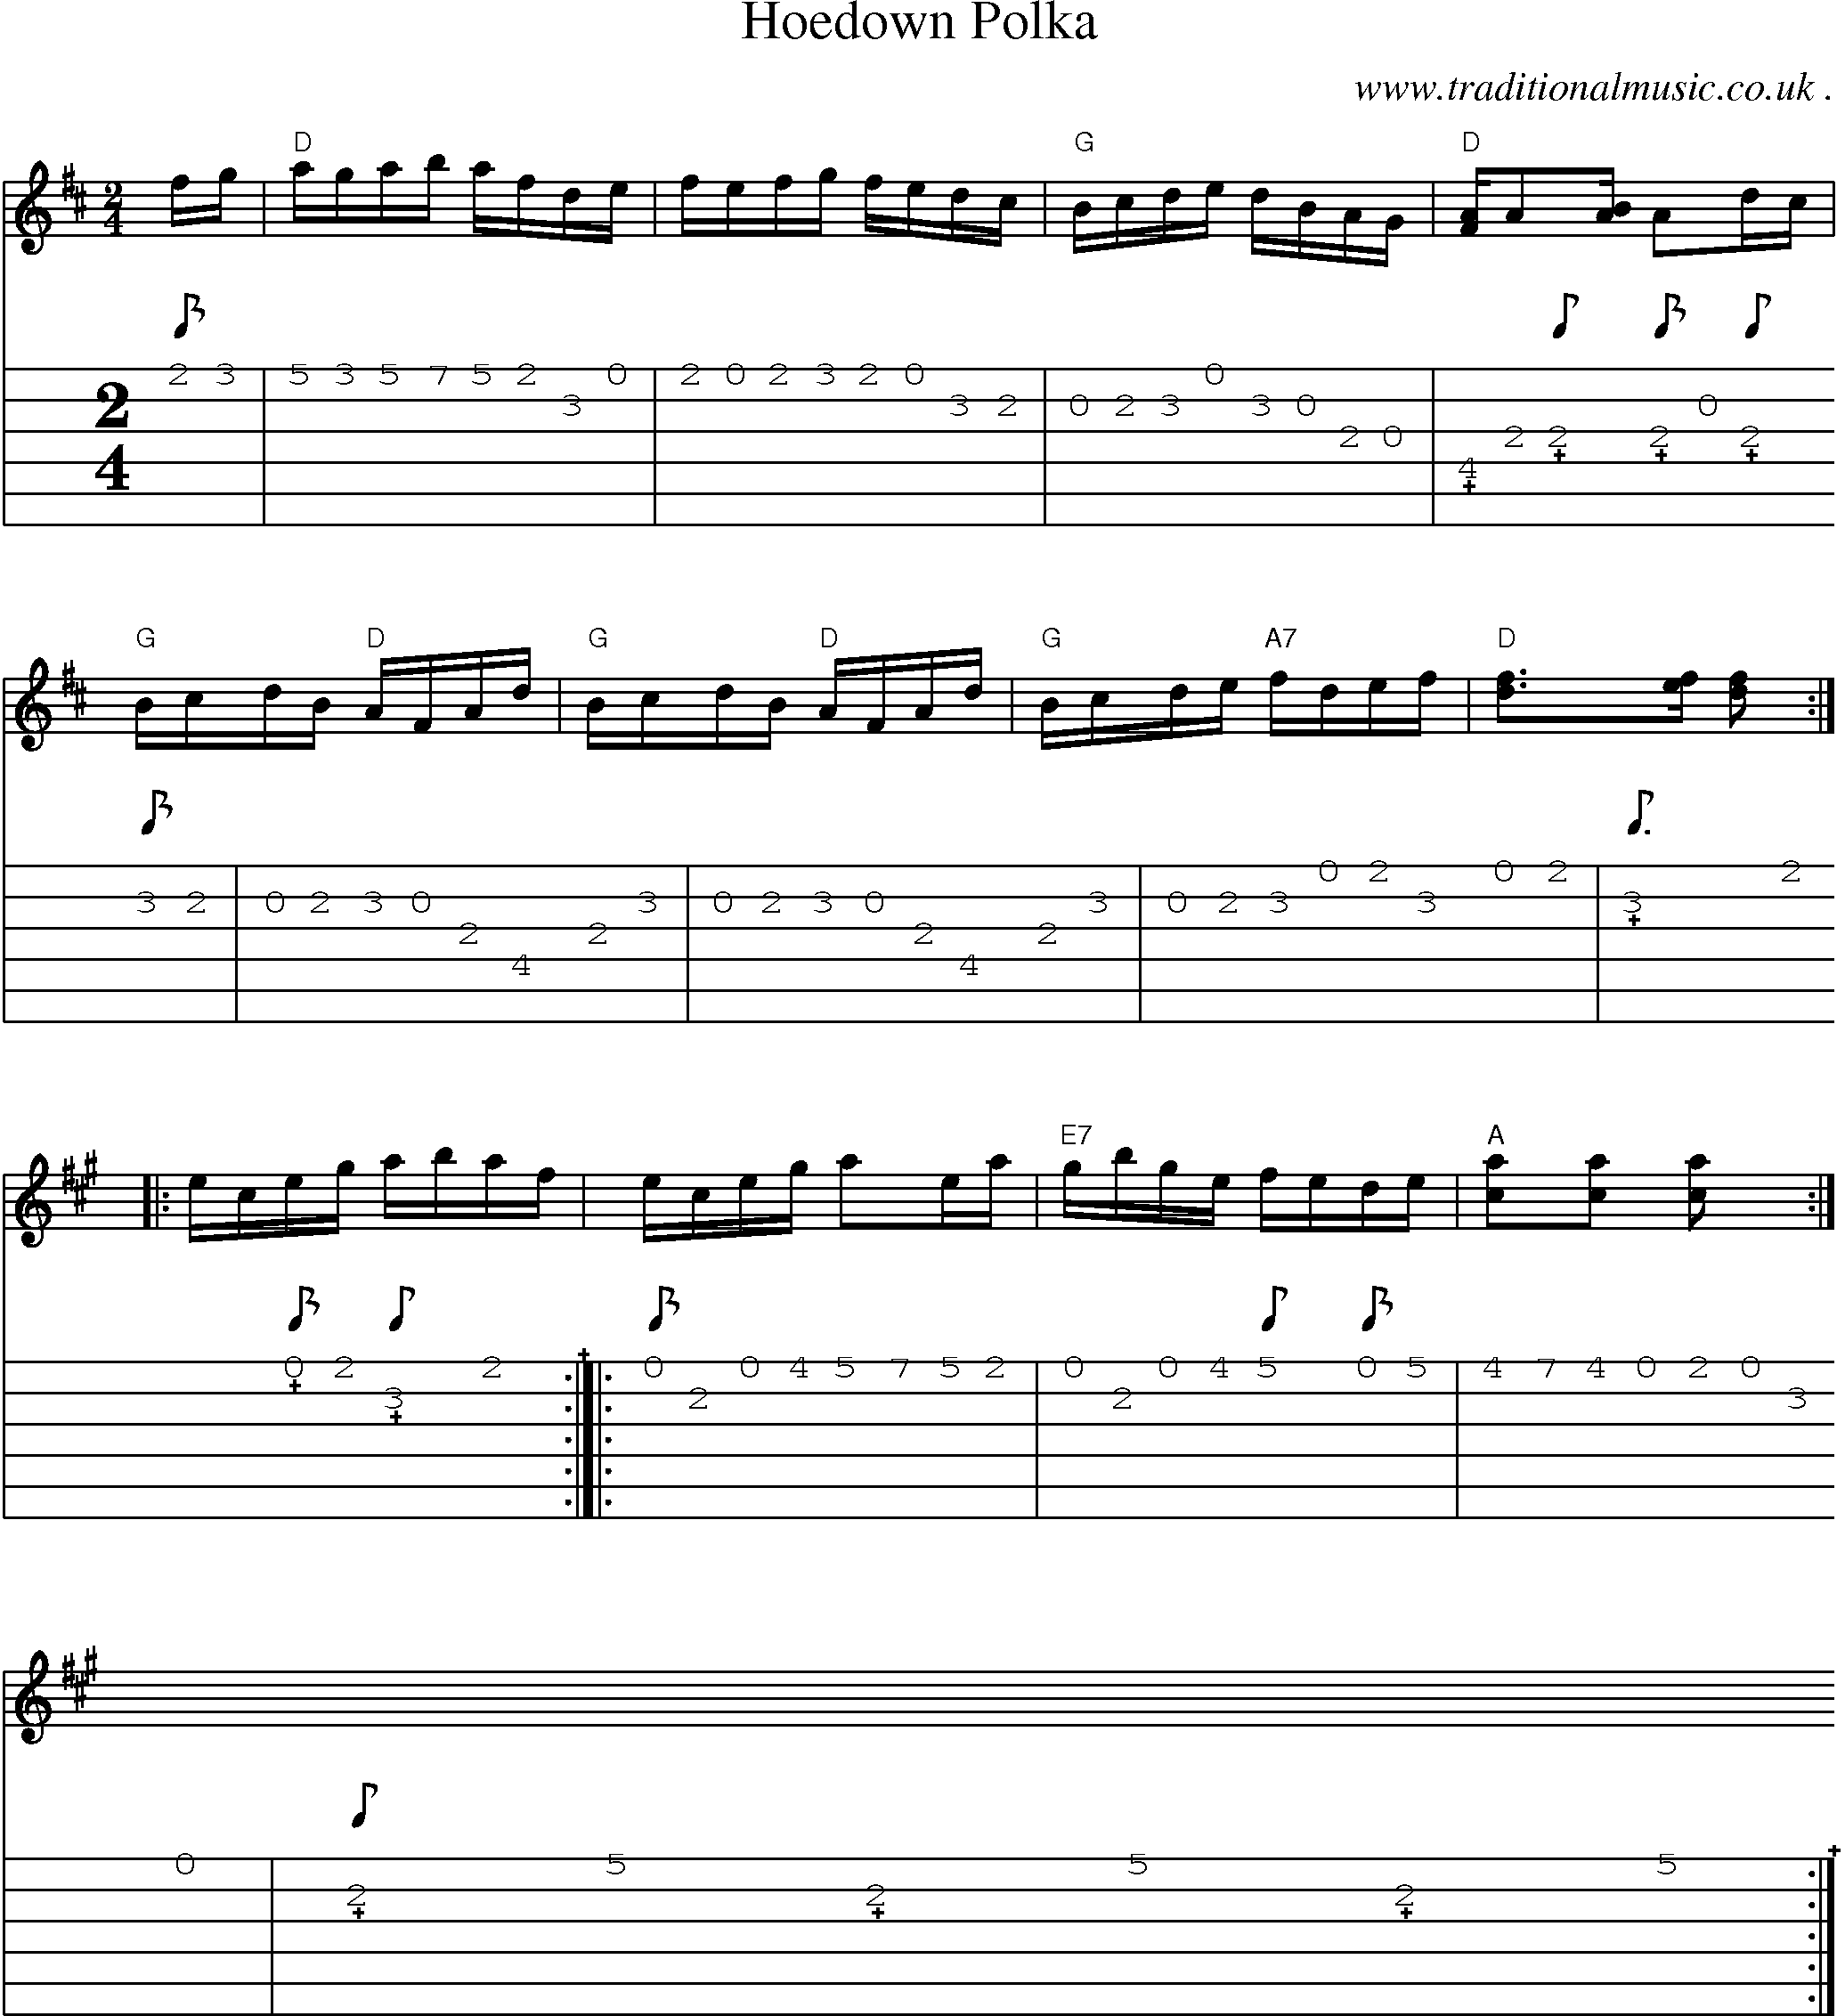 Music Score and Guitar Tabs for Hoedown Polka